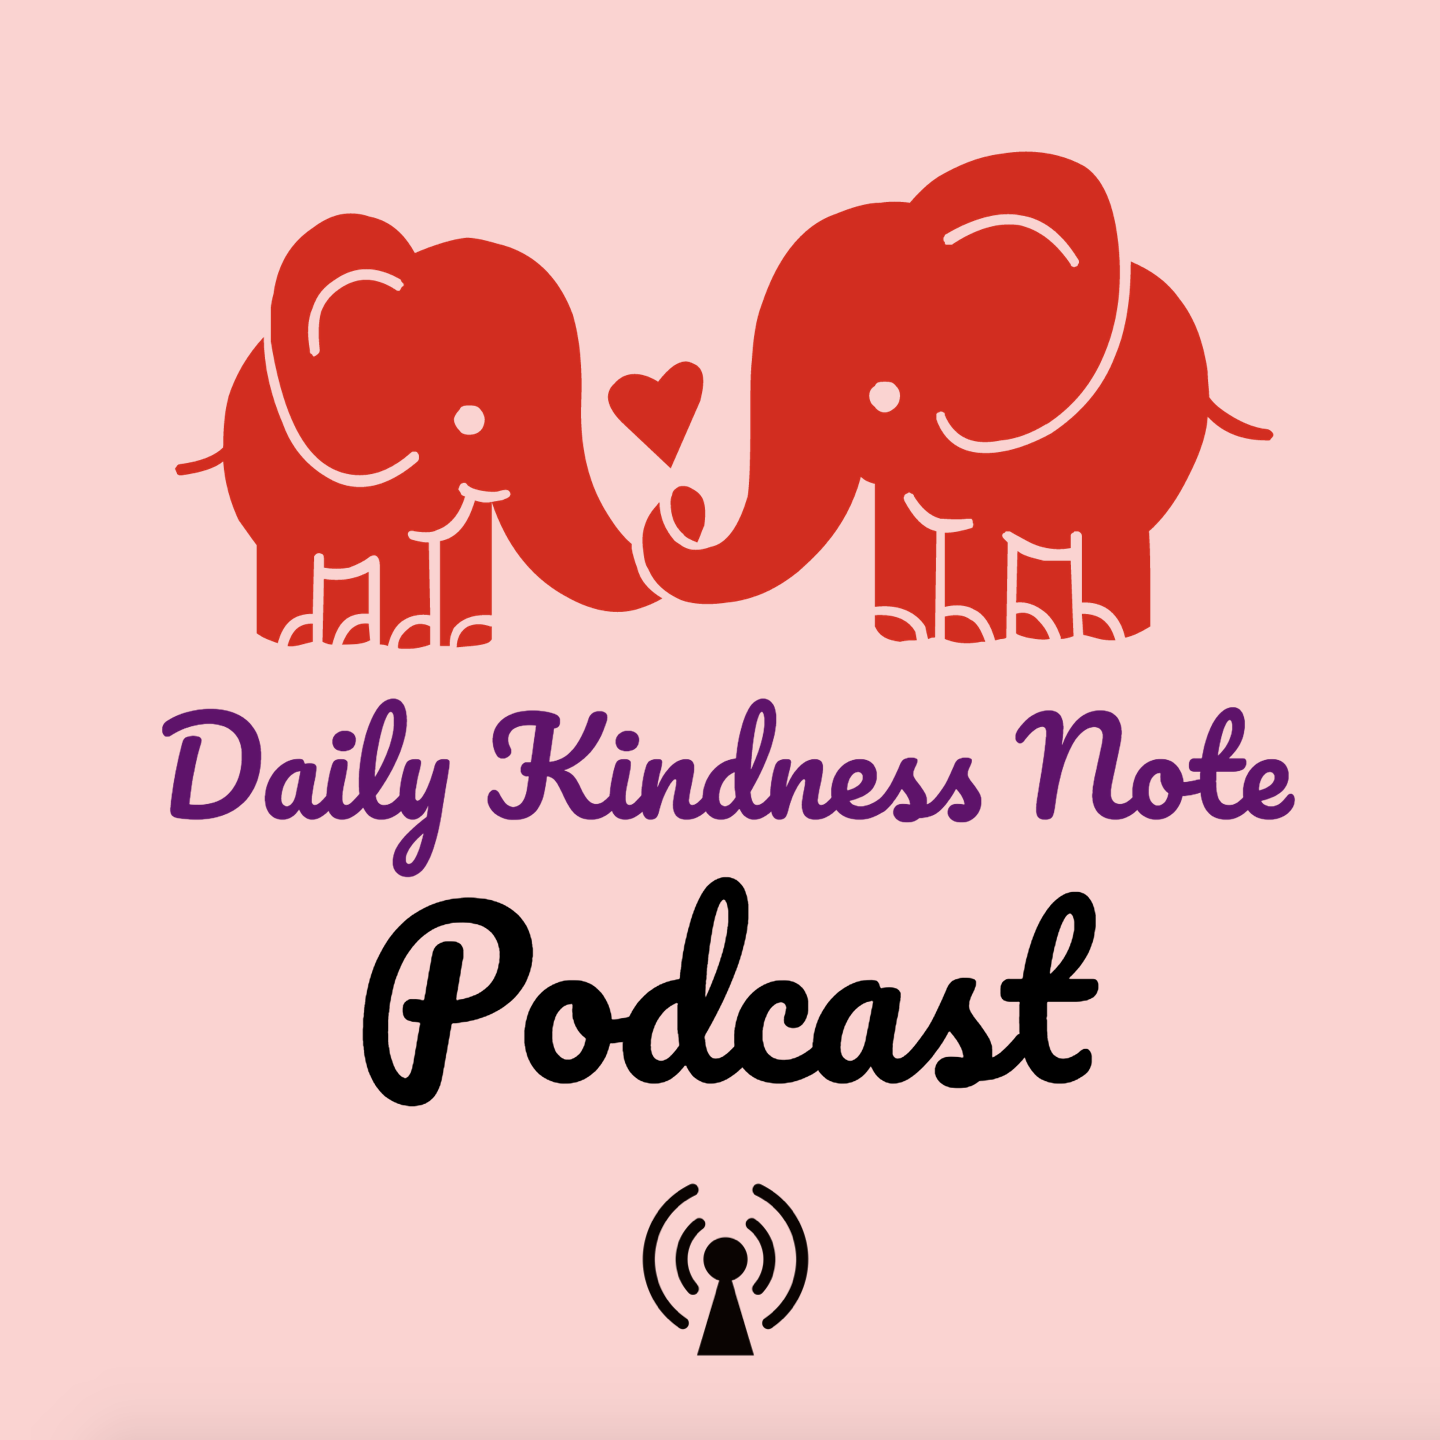 Daily Kindness Note Podcast - Ep. 8: Why You Should be Kind Like Water